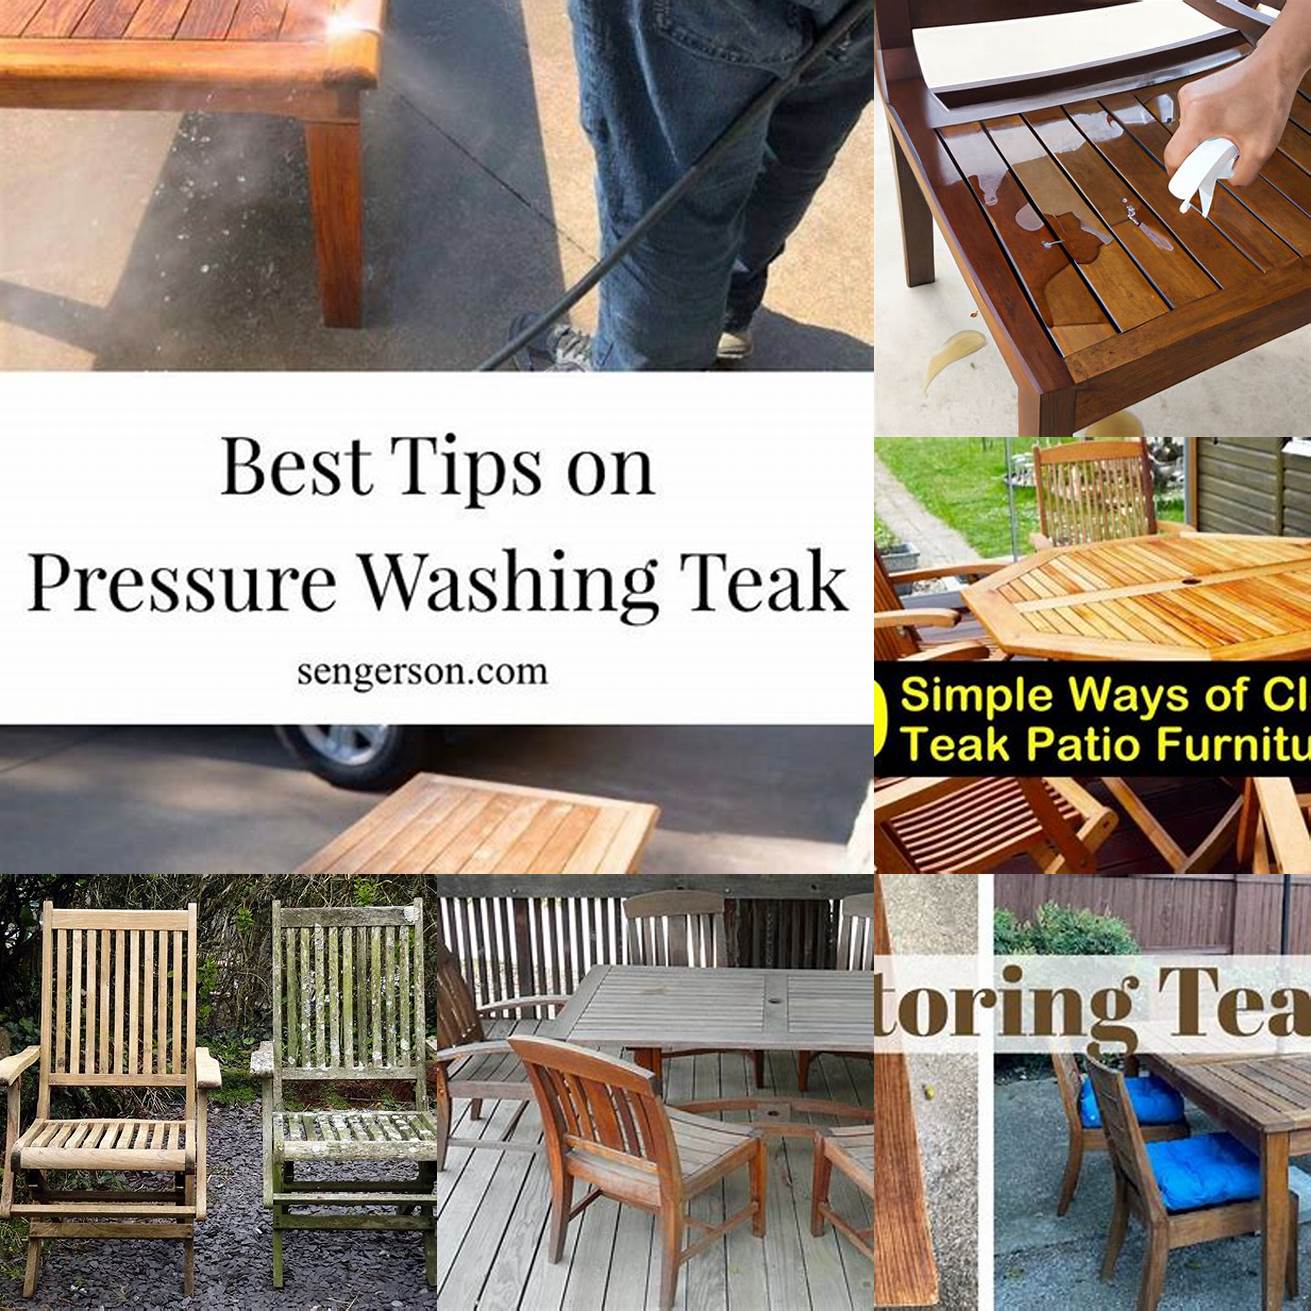 Tips and Tricks for Maintaining Teak Furniture